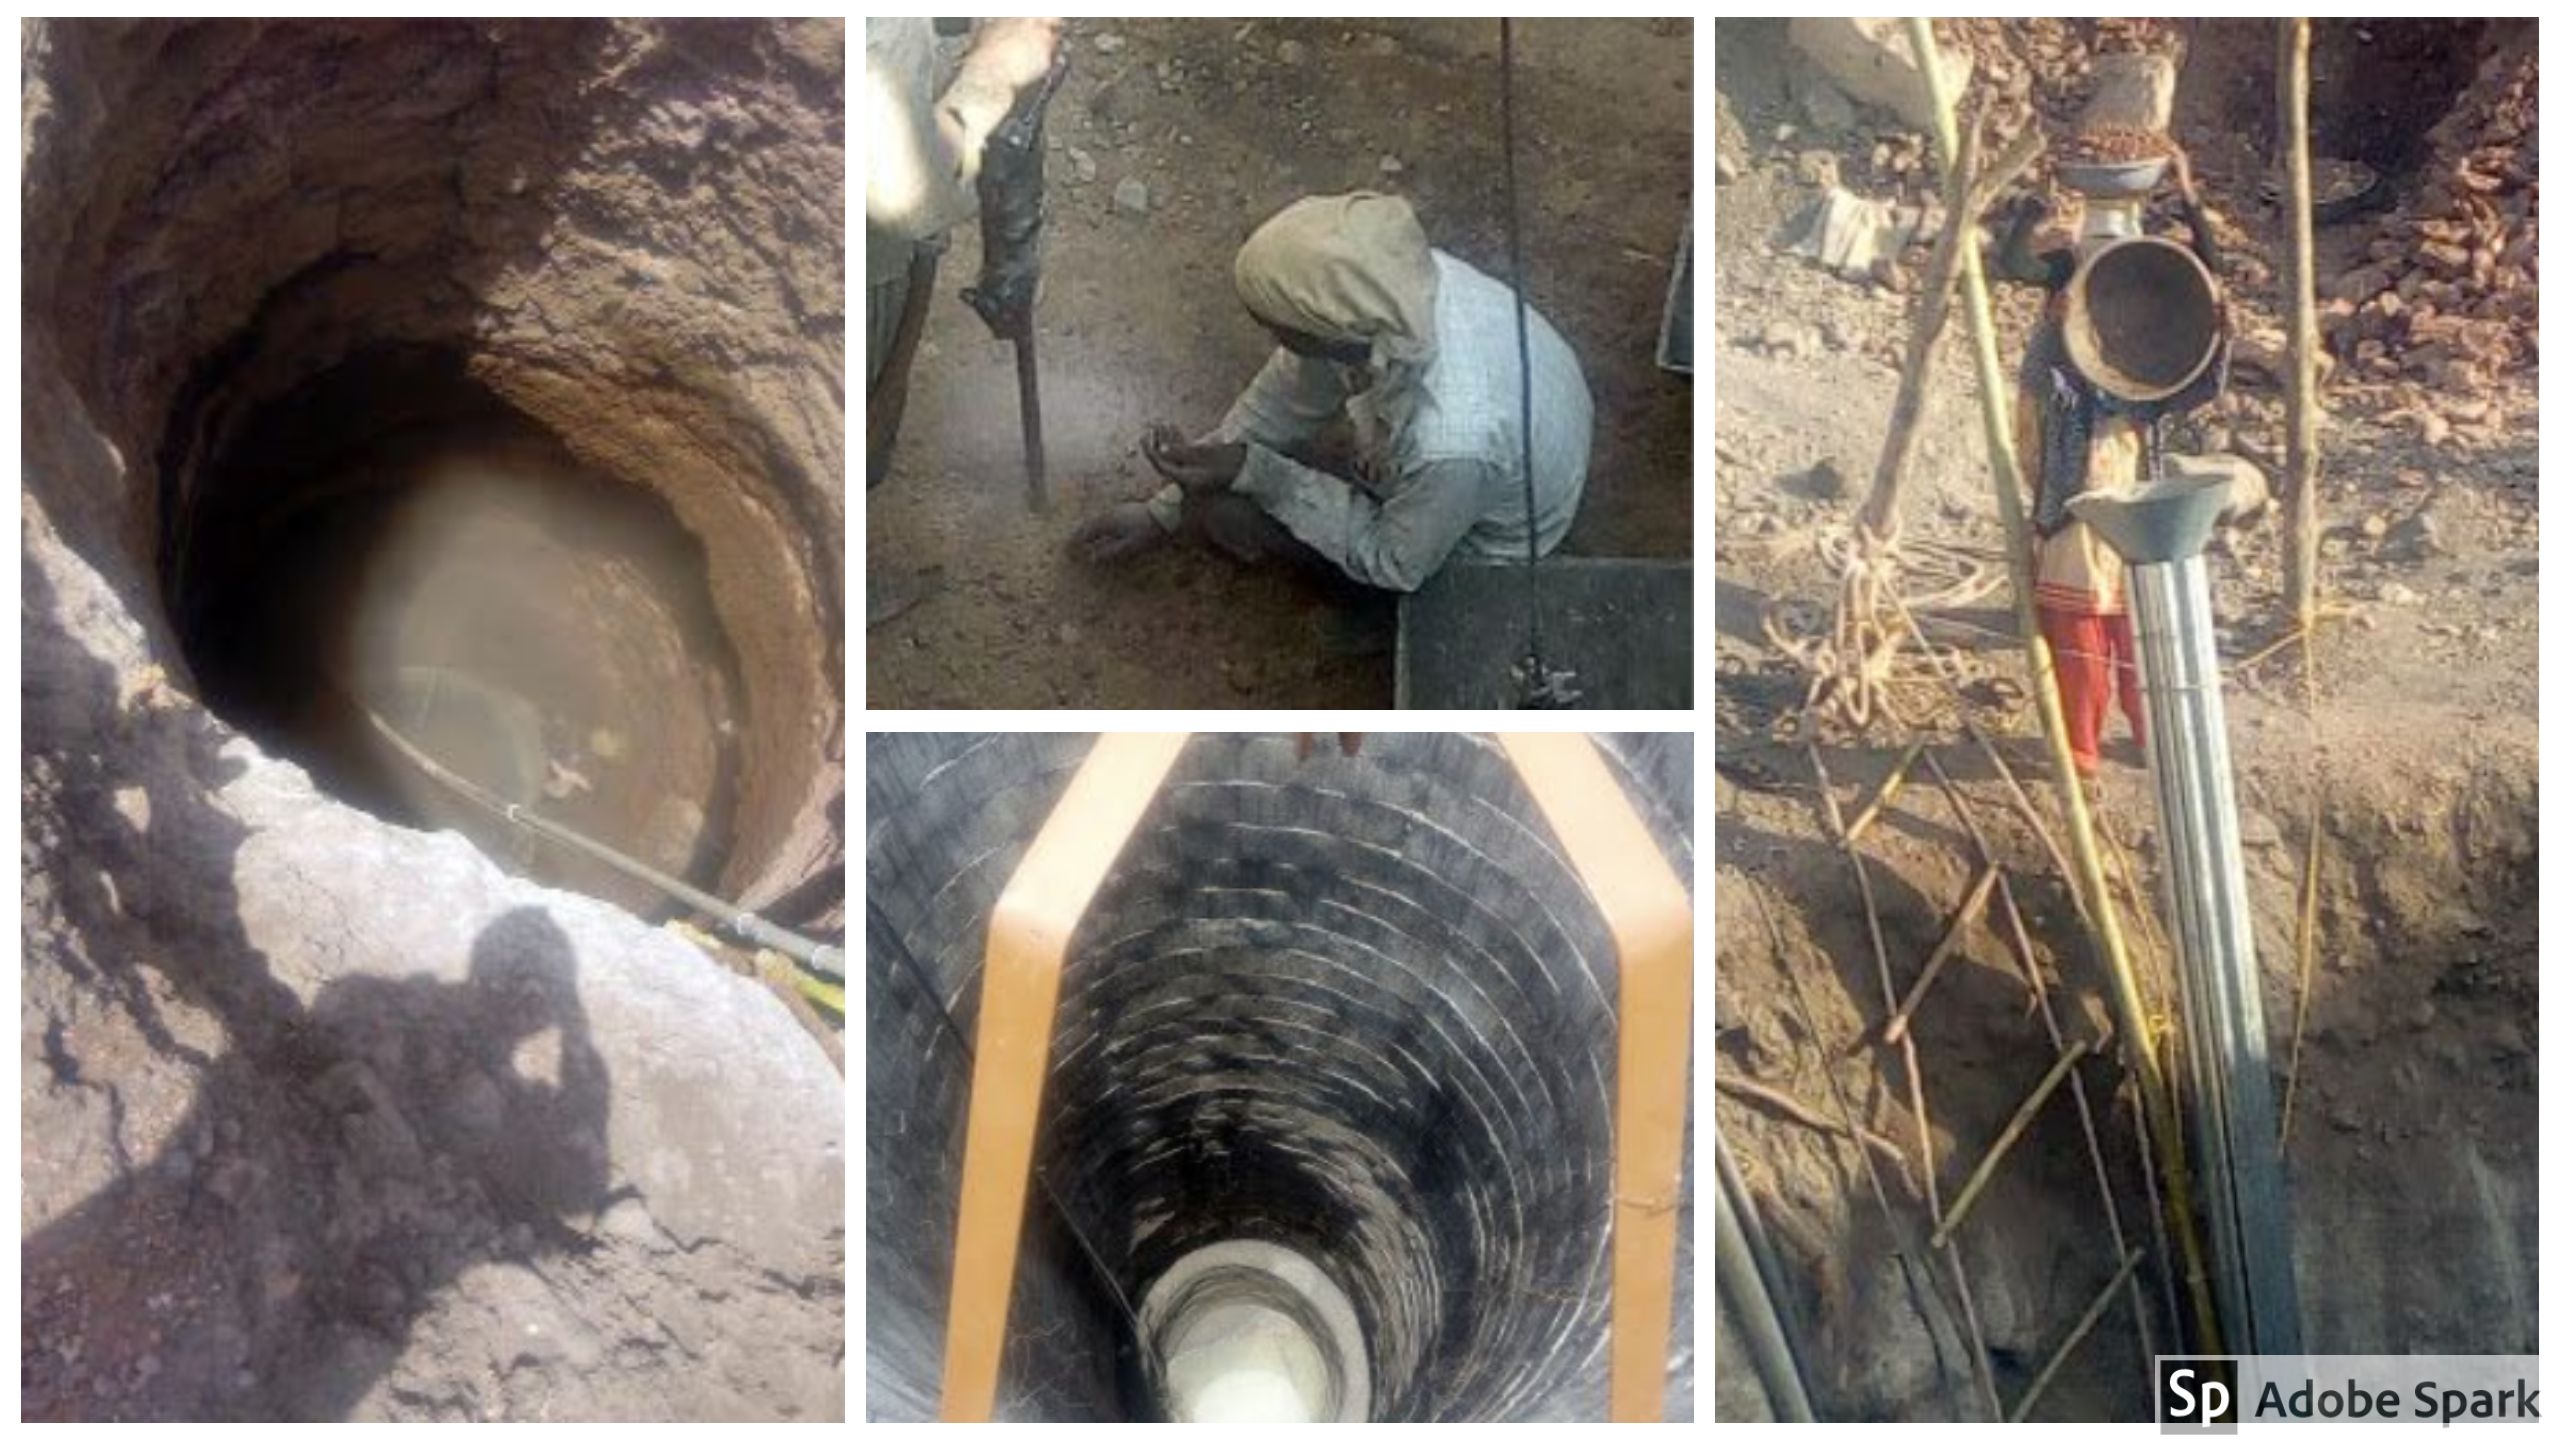 Top middle image: Local technology in which a compressor mounted on a tractor is used to drive an air drill to make the holes in which the dynamite is inserted; Left image: There is a fear of sides of the well collapsing every time blasting was done; Right image: Flexible steel shuttering was used to construct reinforced concrete circular rings in situ and a funnel and pipe assembly was used to pour the concrete into the shuttering; Bottom middle image: The well is finally ready (Images: Rahul Banerjee) 